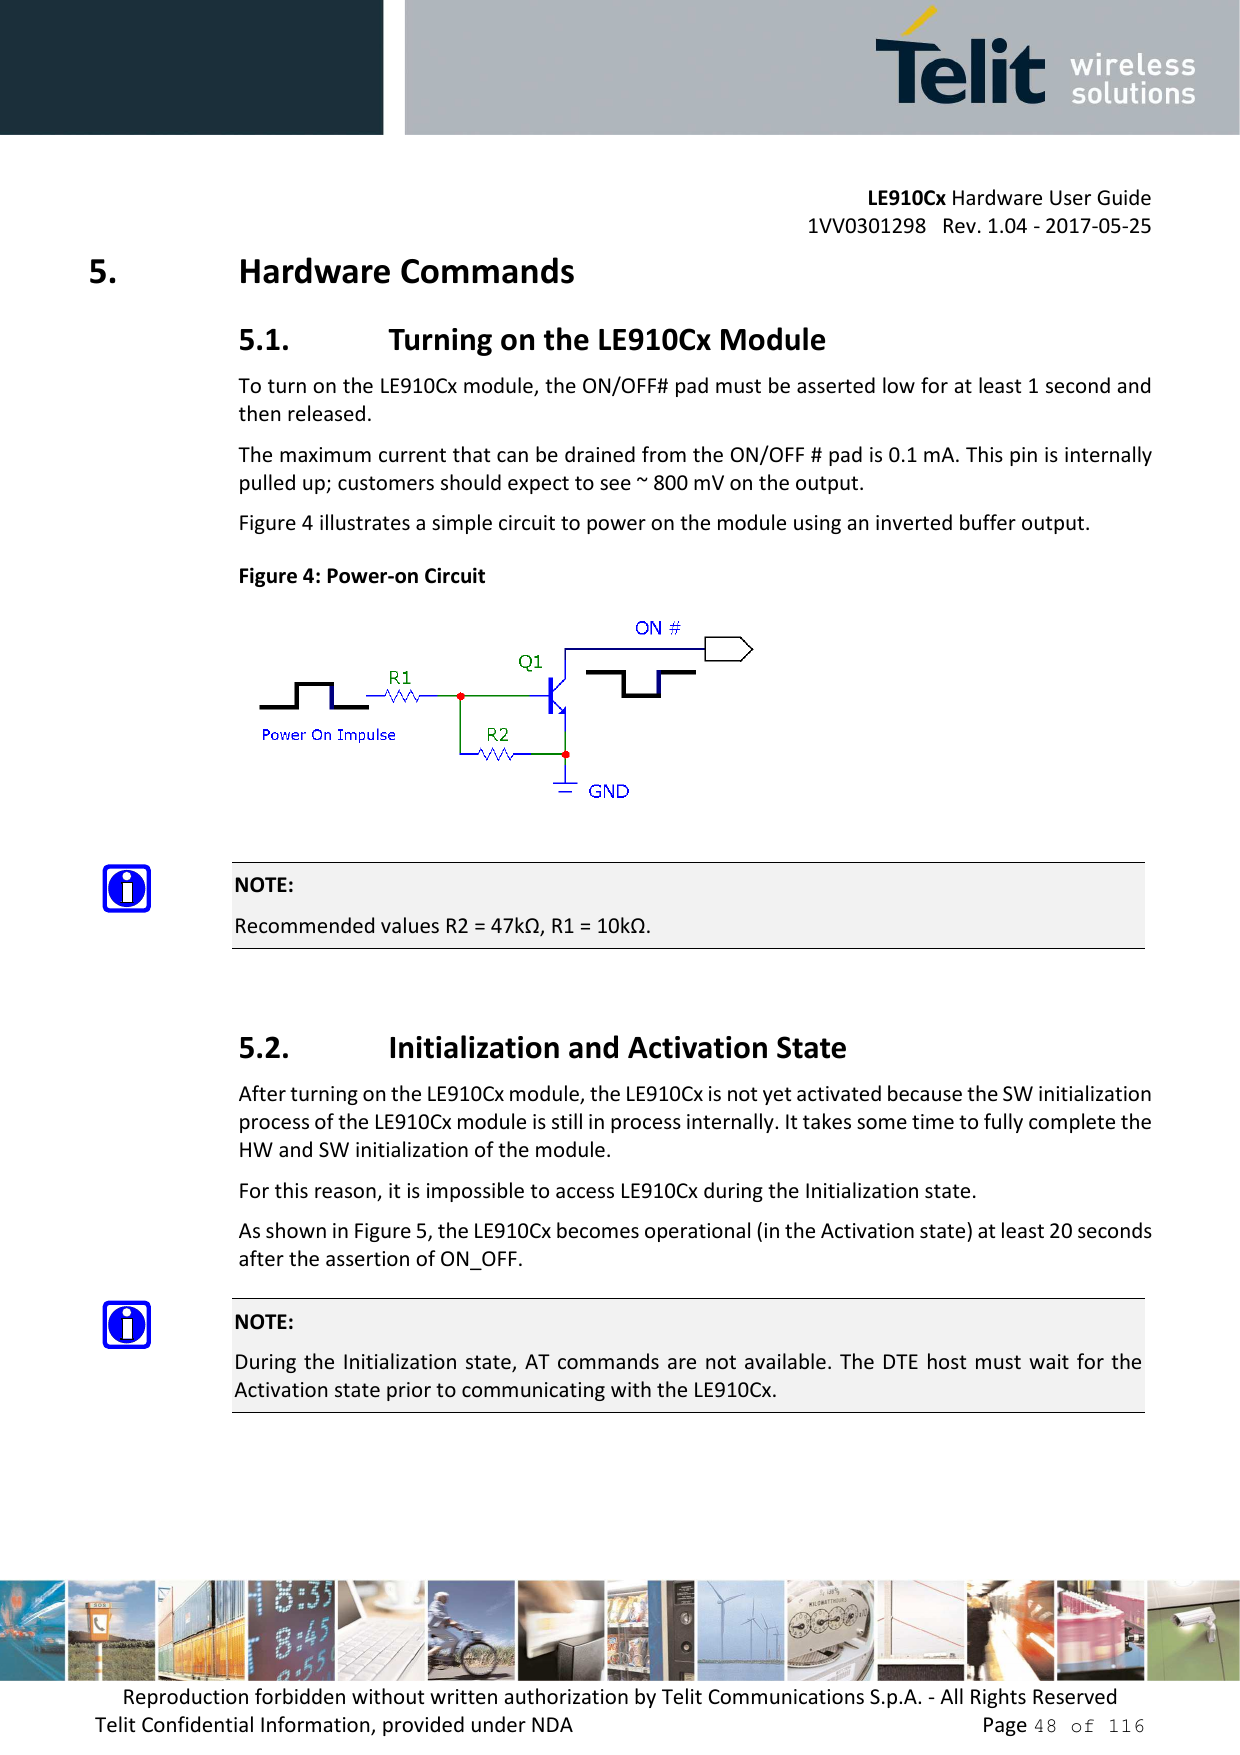         LE910Cx Hardware User Guide 1VV0301298   Rev. 1.04 - 2017-05-25 Reproduction forbidden without written authorization by Telit Communications S.p.A. - All Rights Reserved Telit Confidential Information, provided under NDA                 Page 48 of 116 5. Hardware Commands 5.1. Turning on the LE910Cx Module To turn on the LE910Cx module, the ON/OFF# pad must be asserted low for at least 1 second and then released. The maximum current that can be drained from the ON/OFF # pad is 0.1 mA. This pin is internally pulled up; customers should expect to see ~ 800 mV on the output. Figure 4 illustrates a simple circuit to power on the module using an inverted buffer output. Figure 4: Power-on Circuit   NOTE: Recommended values R2 = 47kΩ, R1 = 10kΩ.  5.2. Initialization and Activation State After turning on the LE910Cx module, the LE910Cx is not yet activated because the SW initialization process of the LE910Cx module is still in process internally. It takes some time to fully complete the HW and SW initialization of the module. For this reason, it is impossible to access LE910Cx during the Initialization state. As shown in Figure 5, the LE910Cx becomes operational (in the Activation state) at least 20 seconds after the assertion of ON_OFF.  NOTE: During the  Initialization state,  AT commands are not available. The DTE  host must  wait for the Activation state prior to communicating with the LE910Cx.  